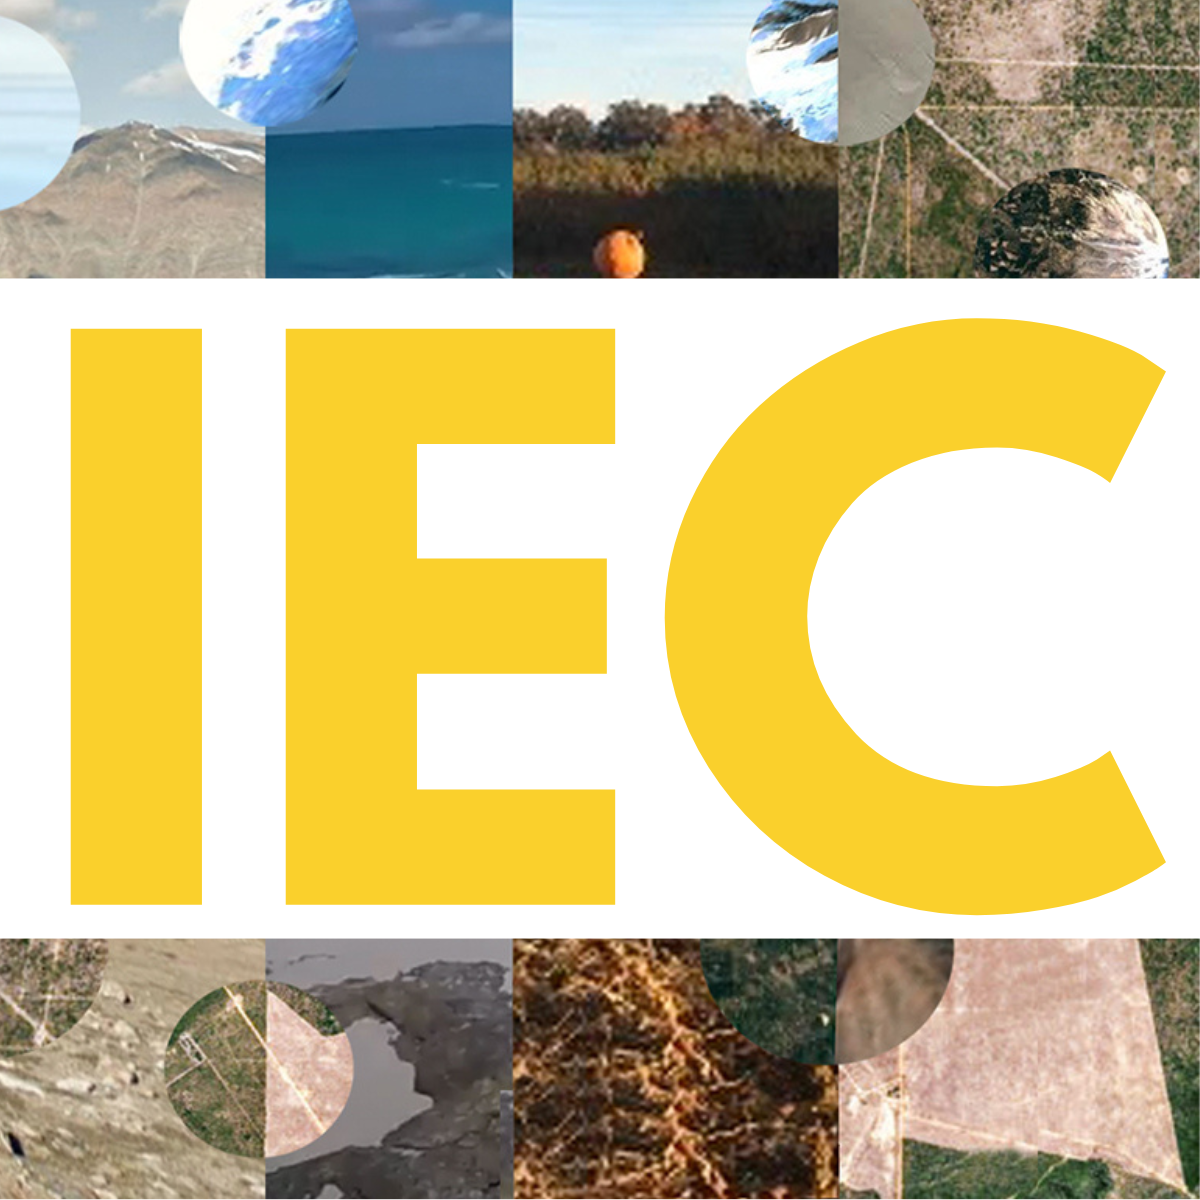 IEC yellow letters overlaid a photo collage